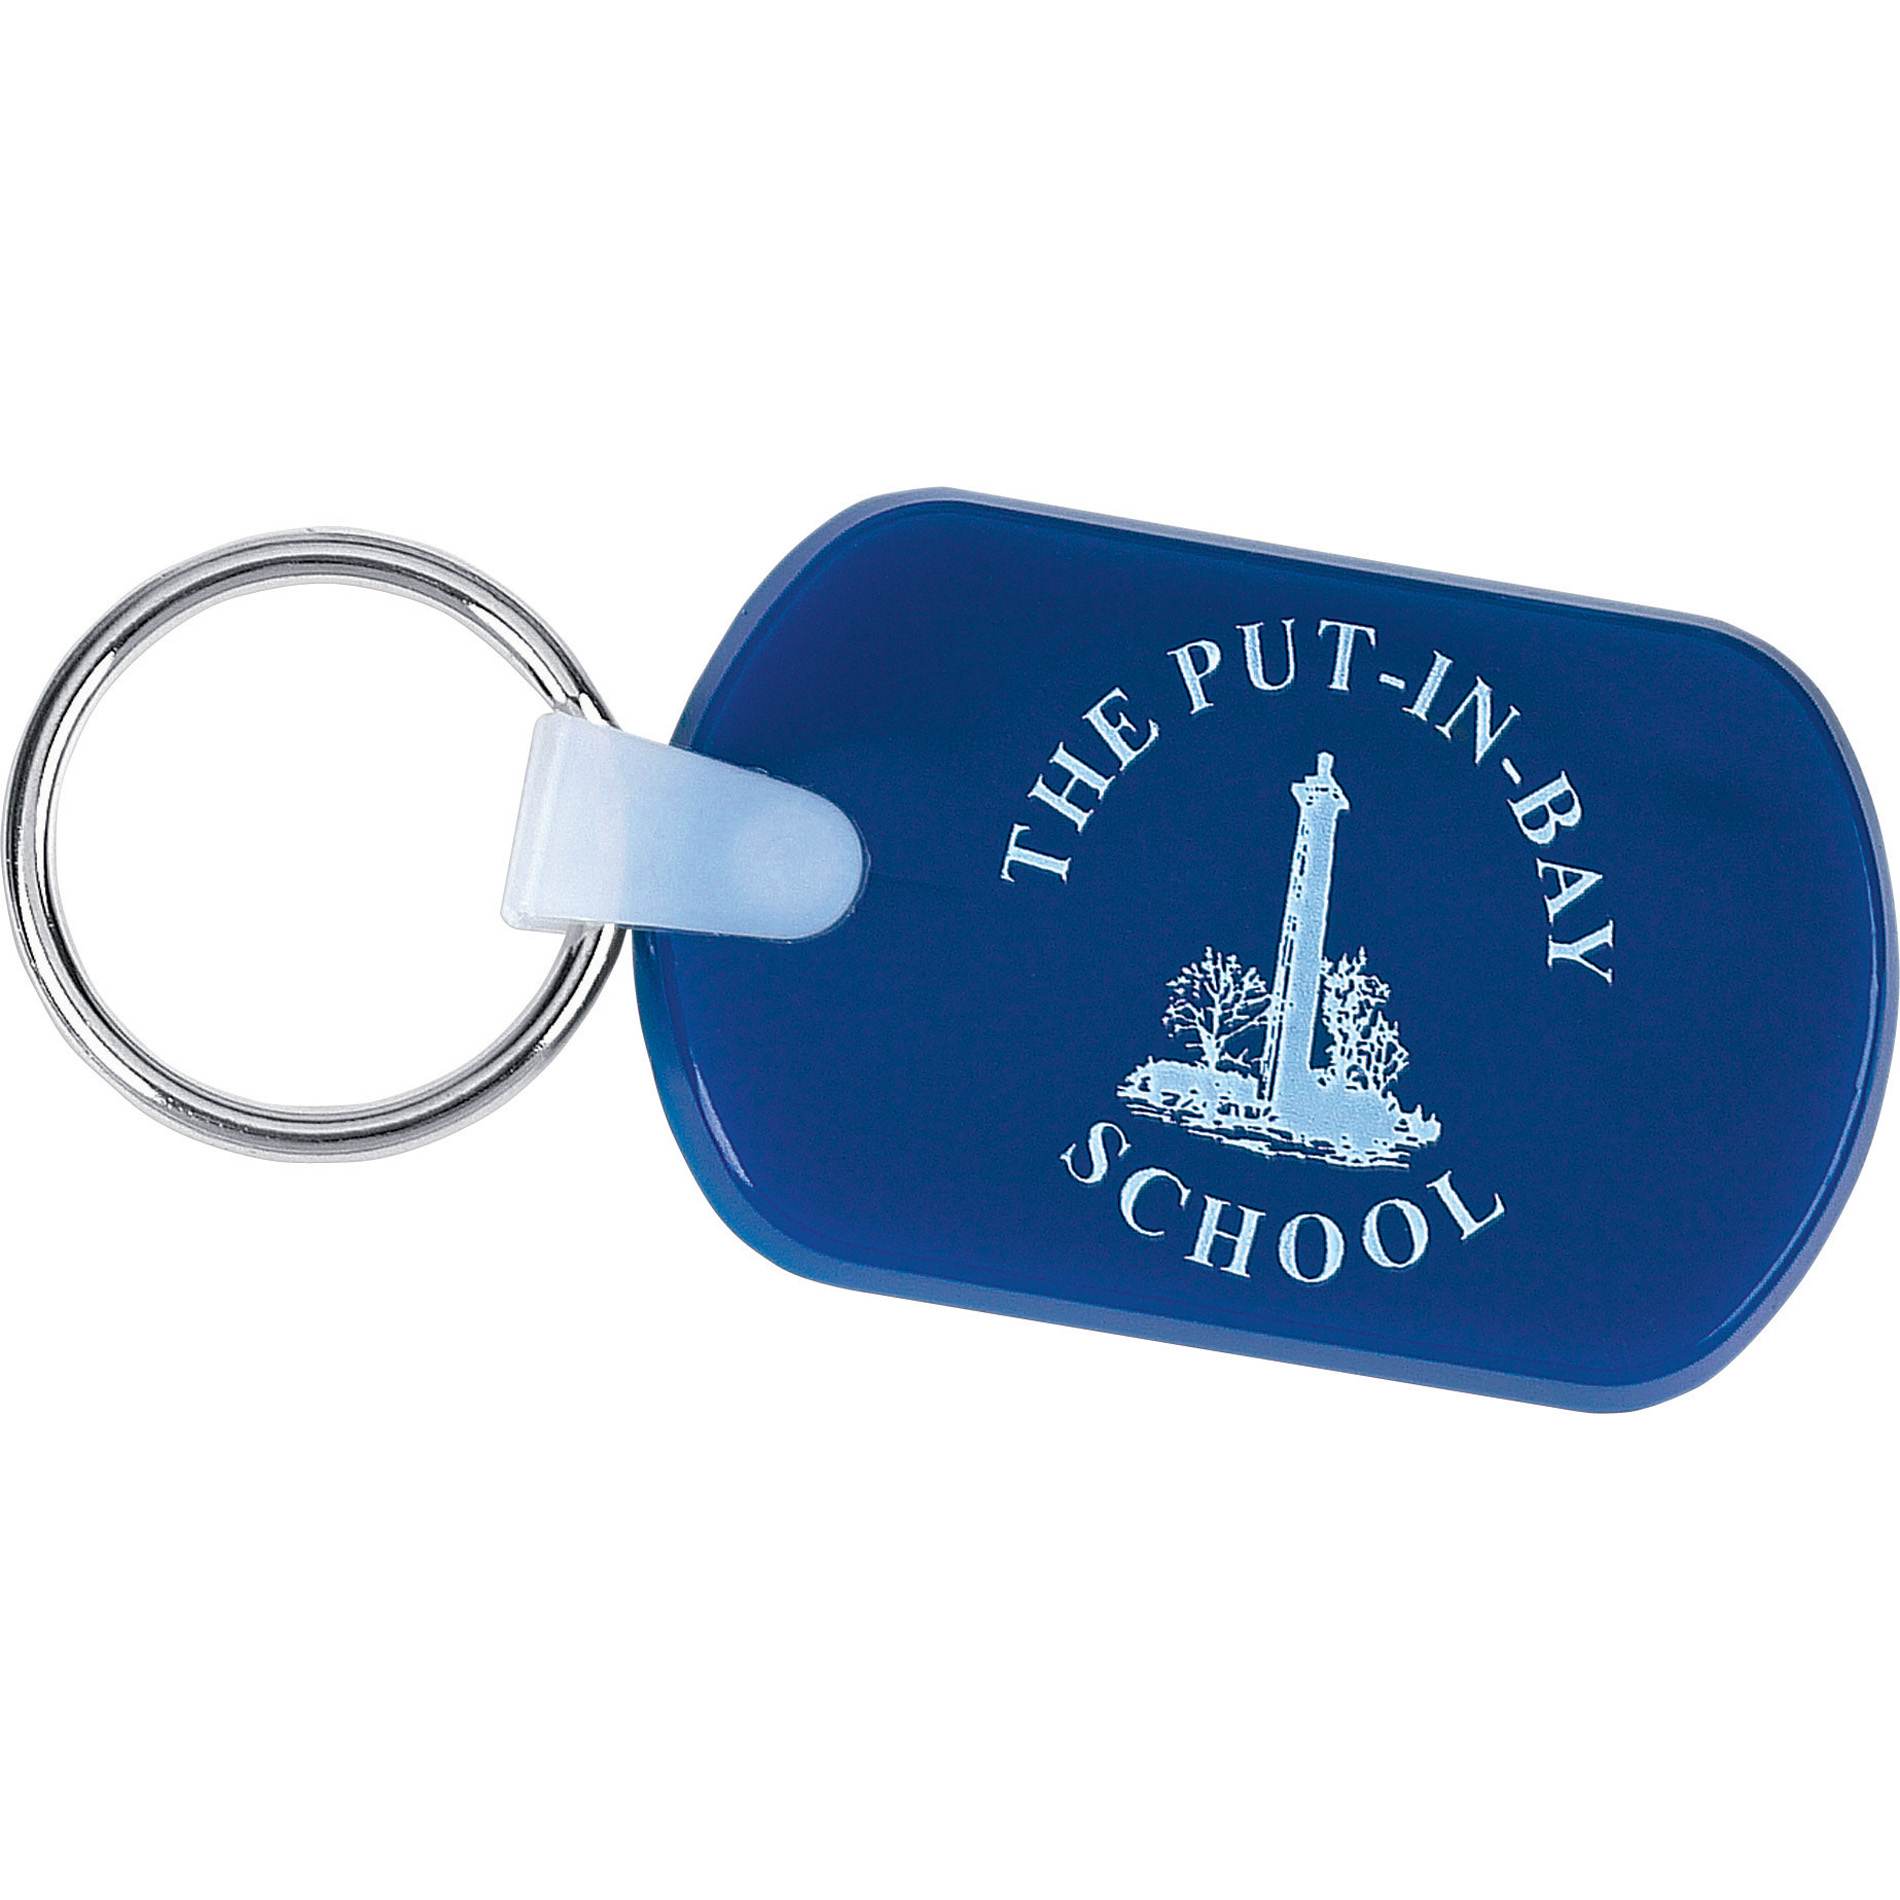 Promotional Gifts & Kits | Key Chains